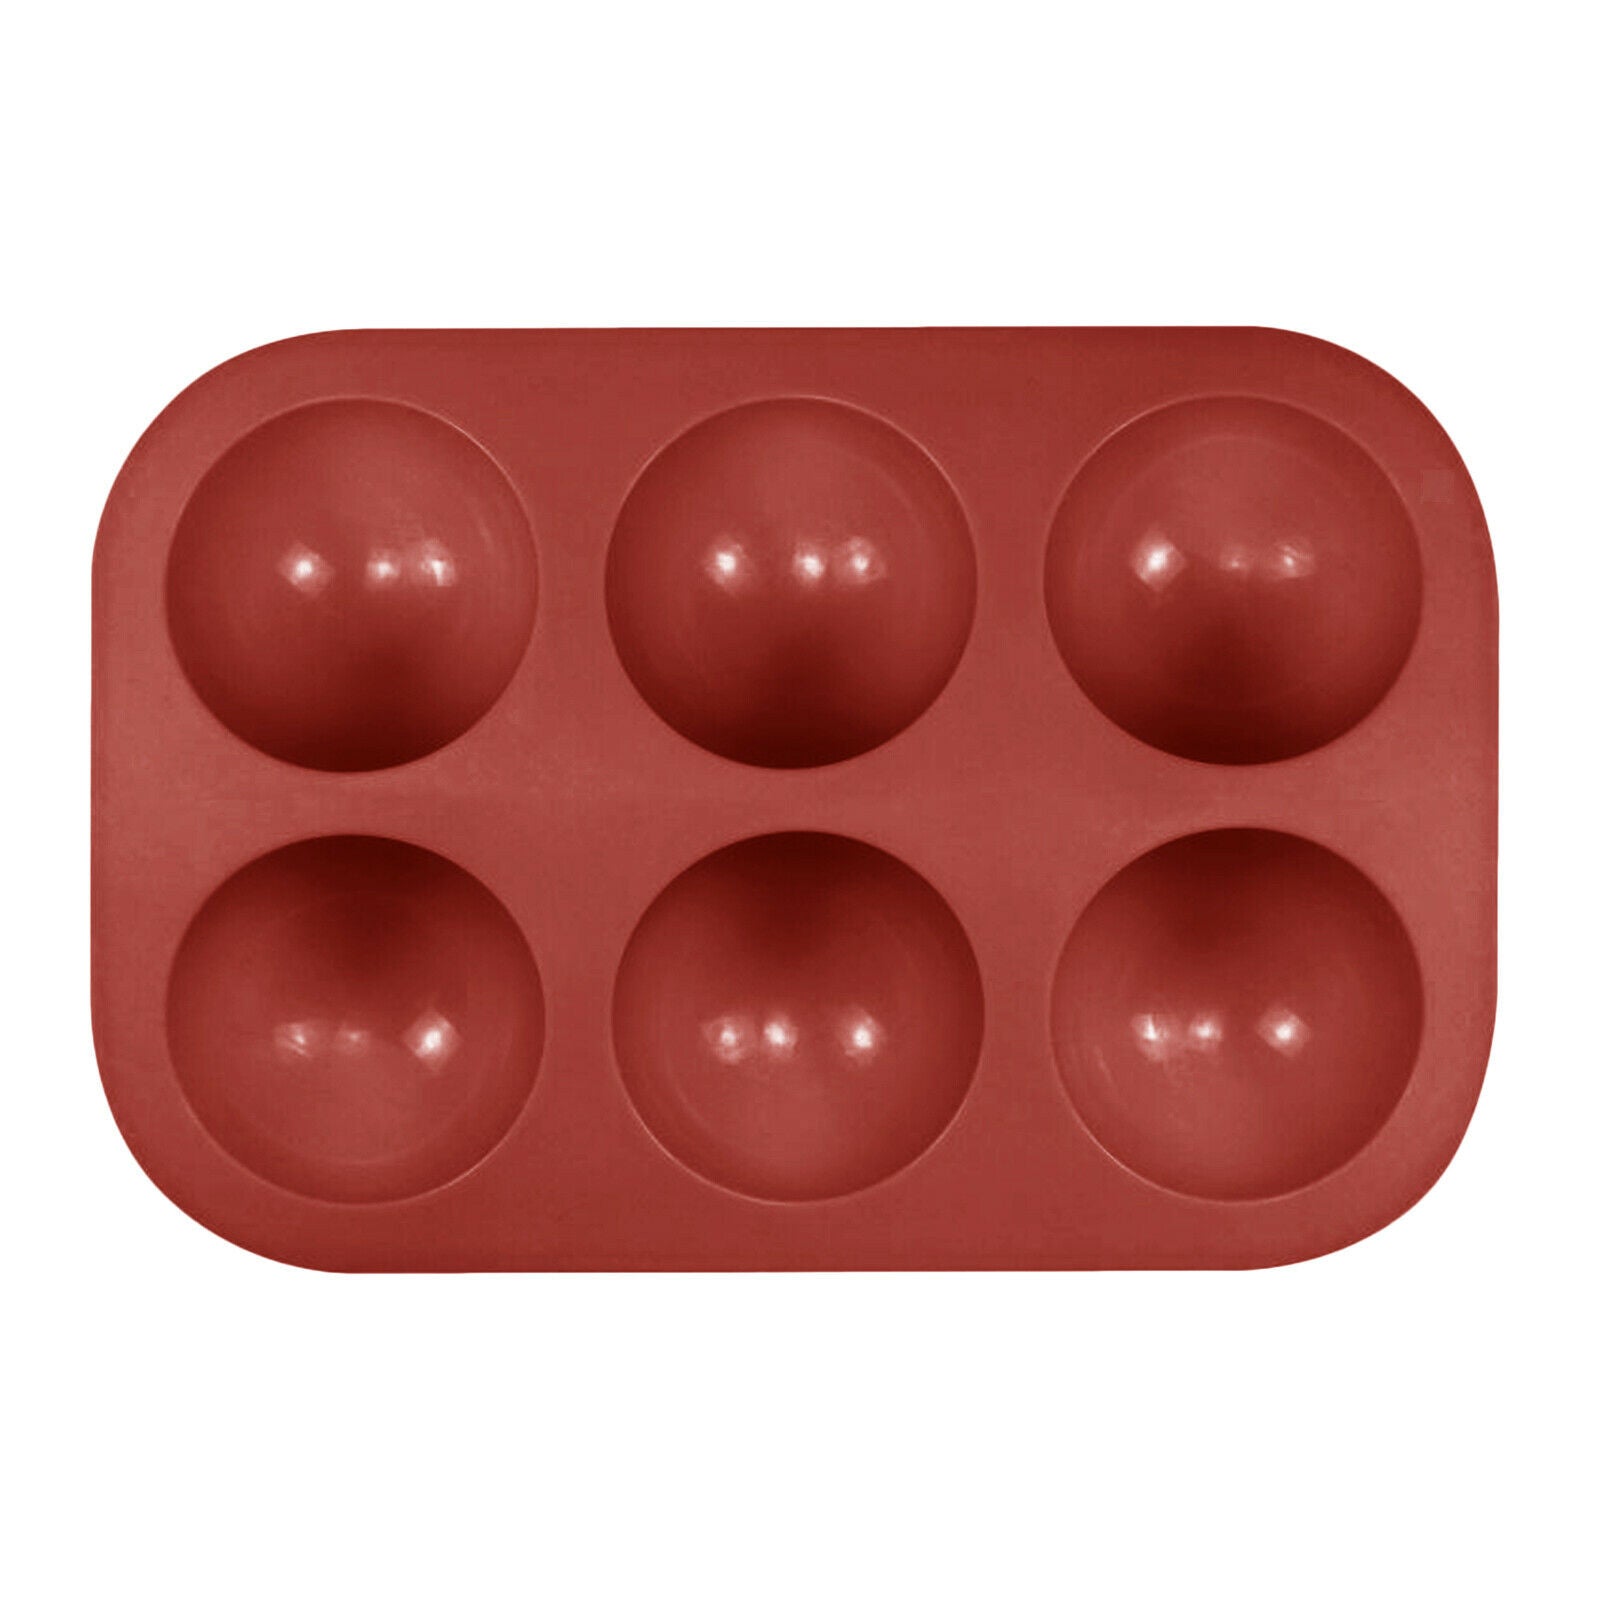 1pc Half Ball Sphere Silicone Cake Mold Muffin Chocolate Cookie Baking Mould